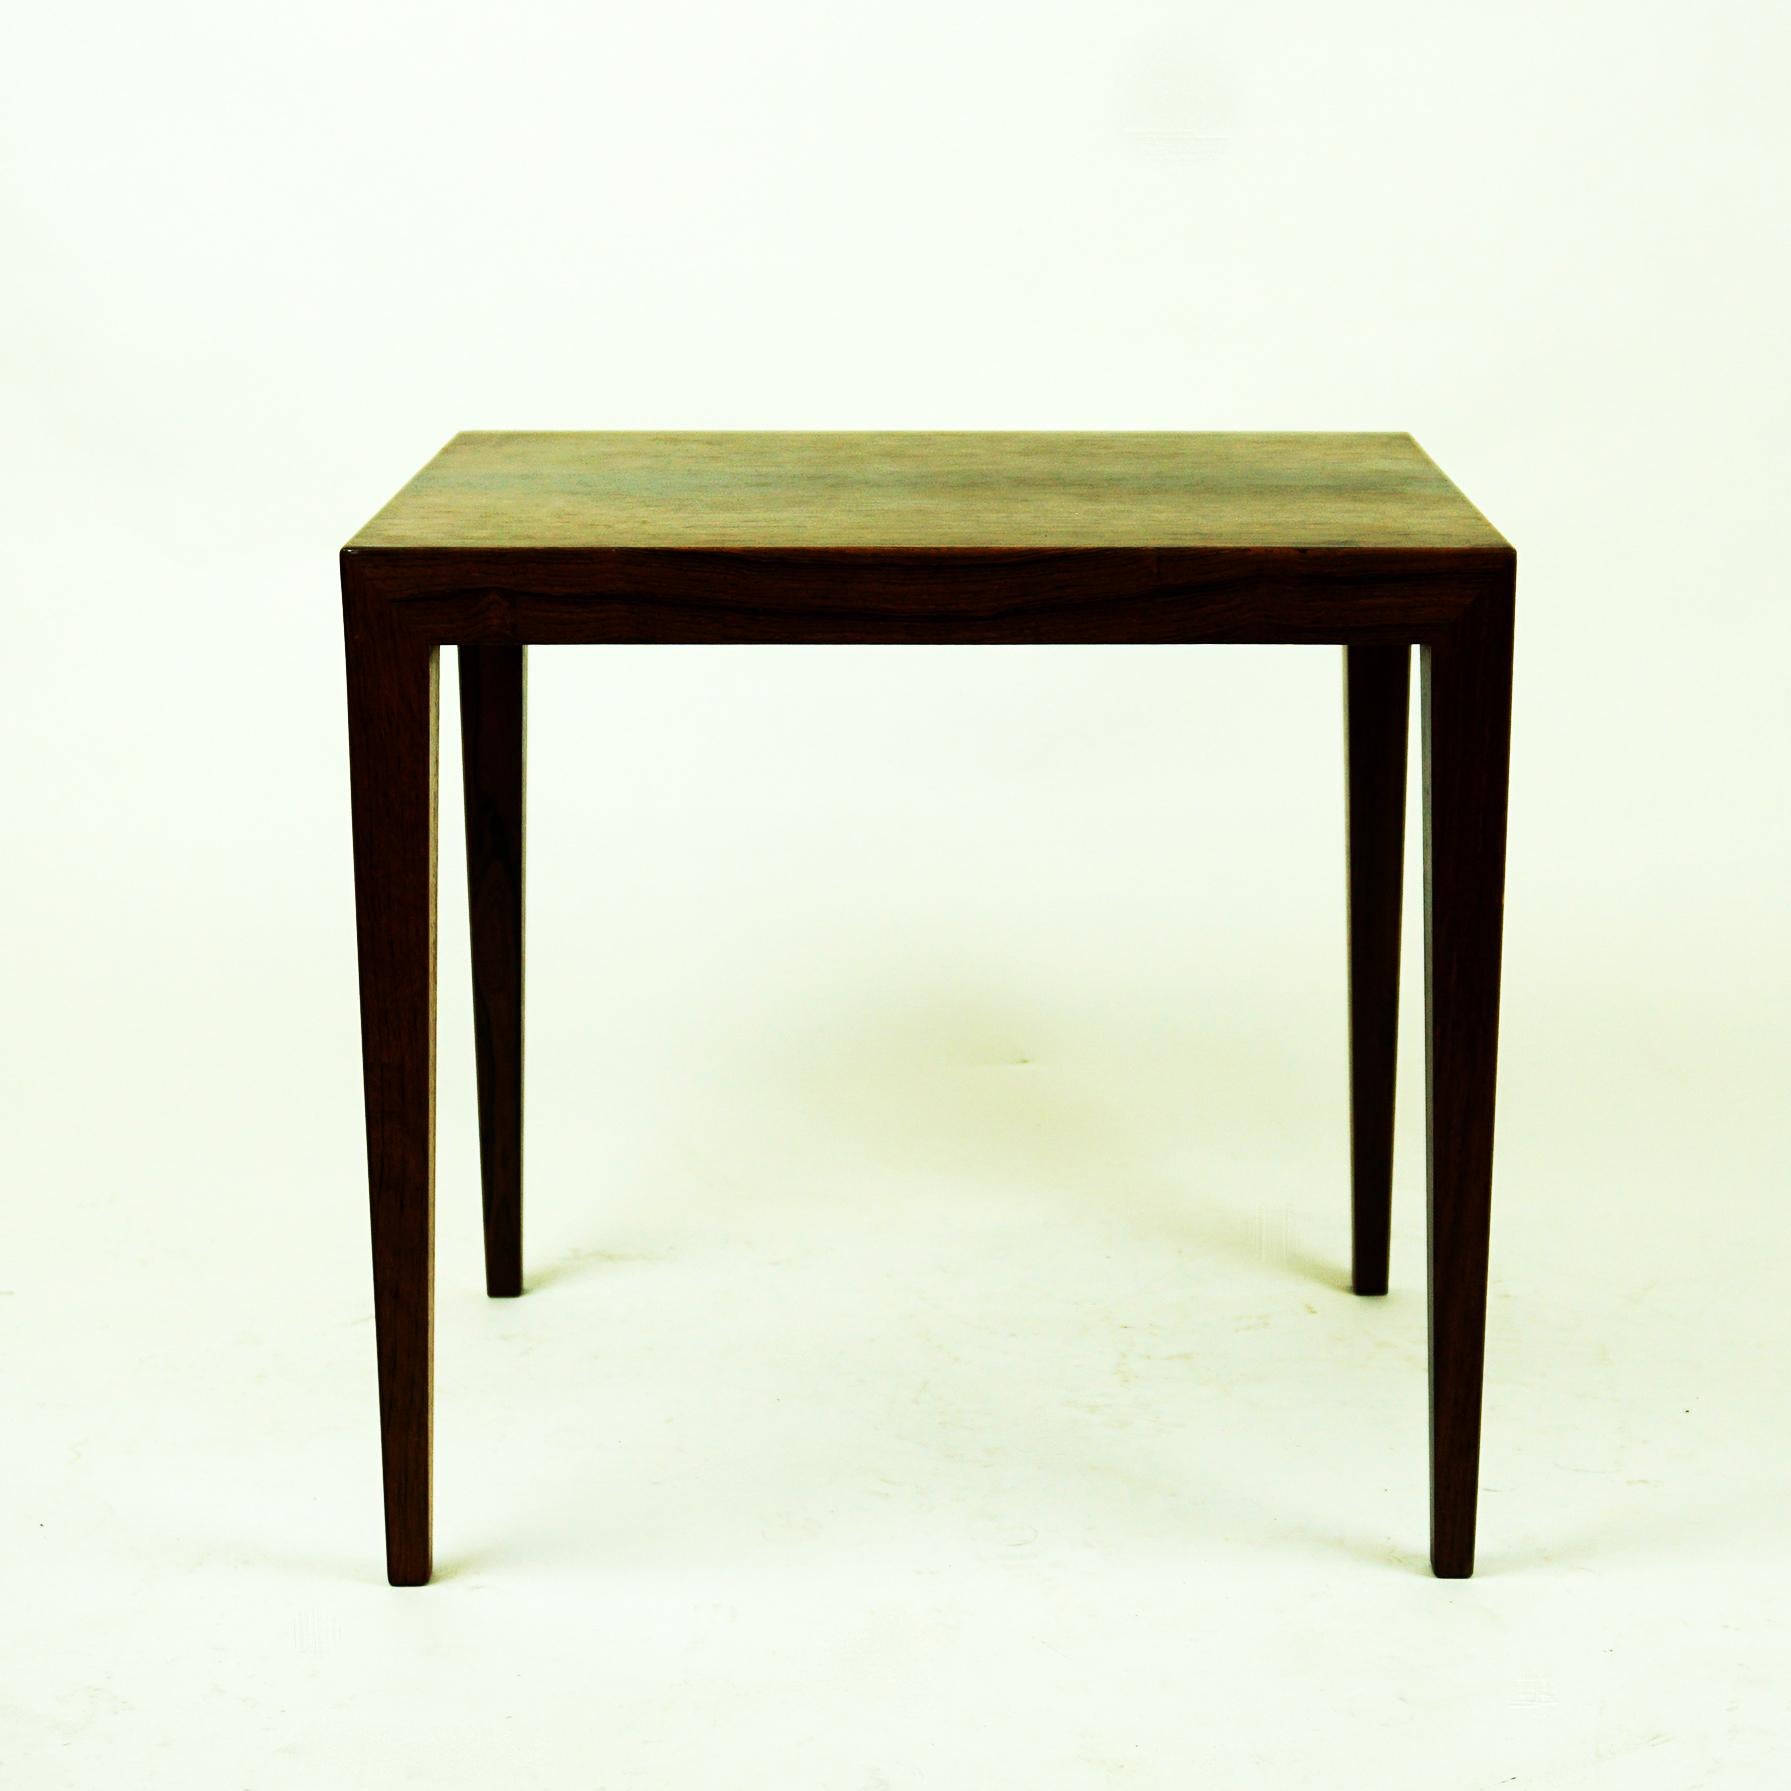 Small charming Danish 1960s rosewood side table with beautiful handcrafted details designed by Severin Hansen for Haslev Mobelsnedkeri. Pure and elegant shape with beautiful grained wood.